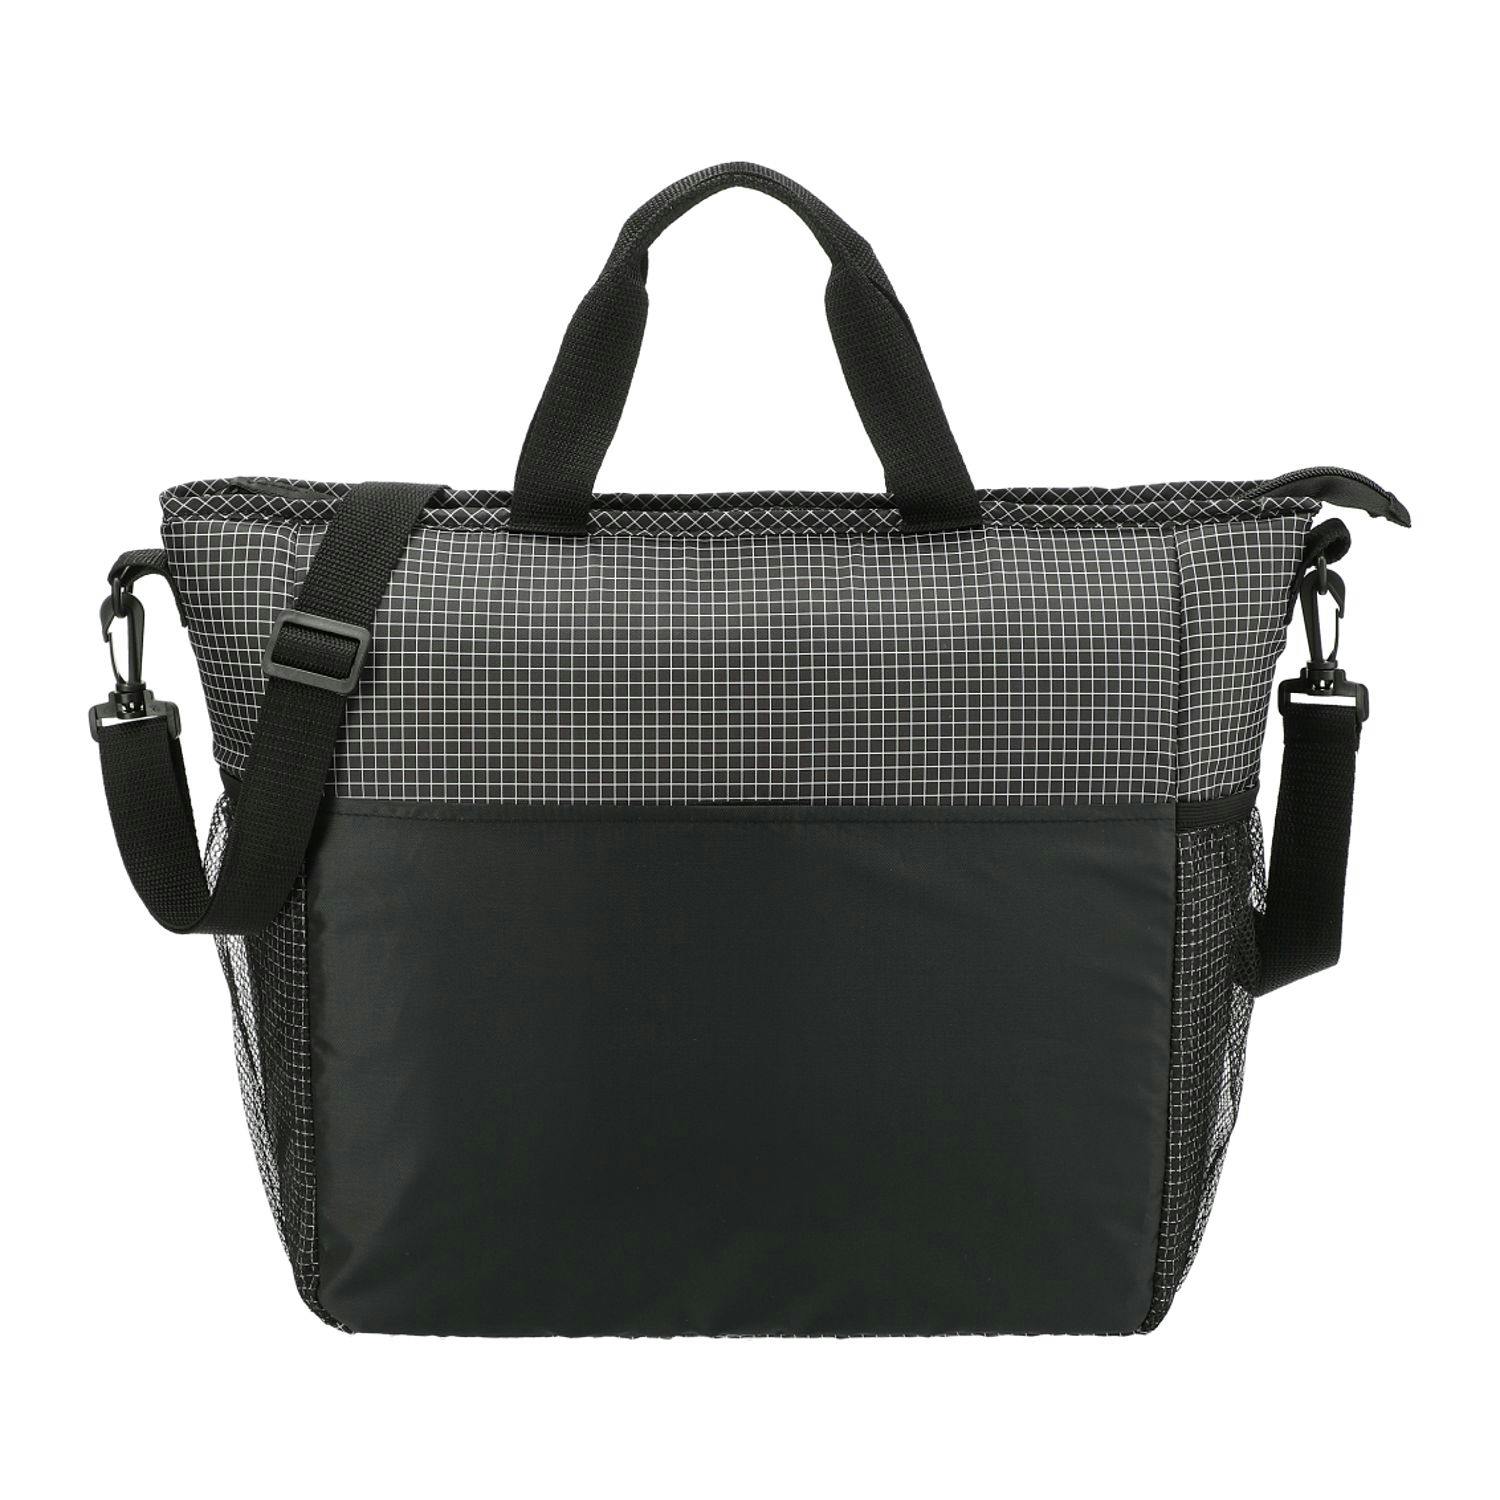 Grid Tote 24 Can Cooler - additional Image 4